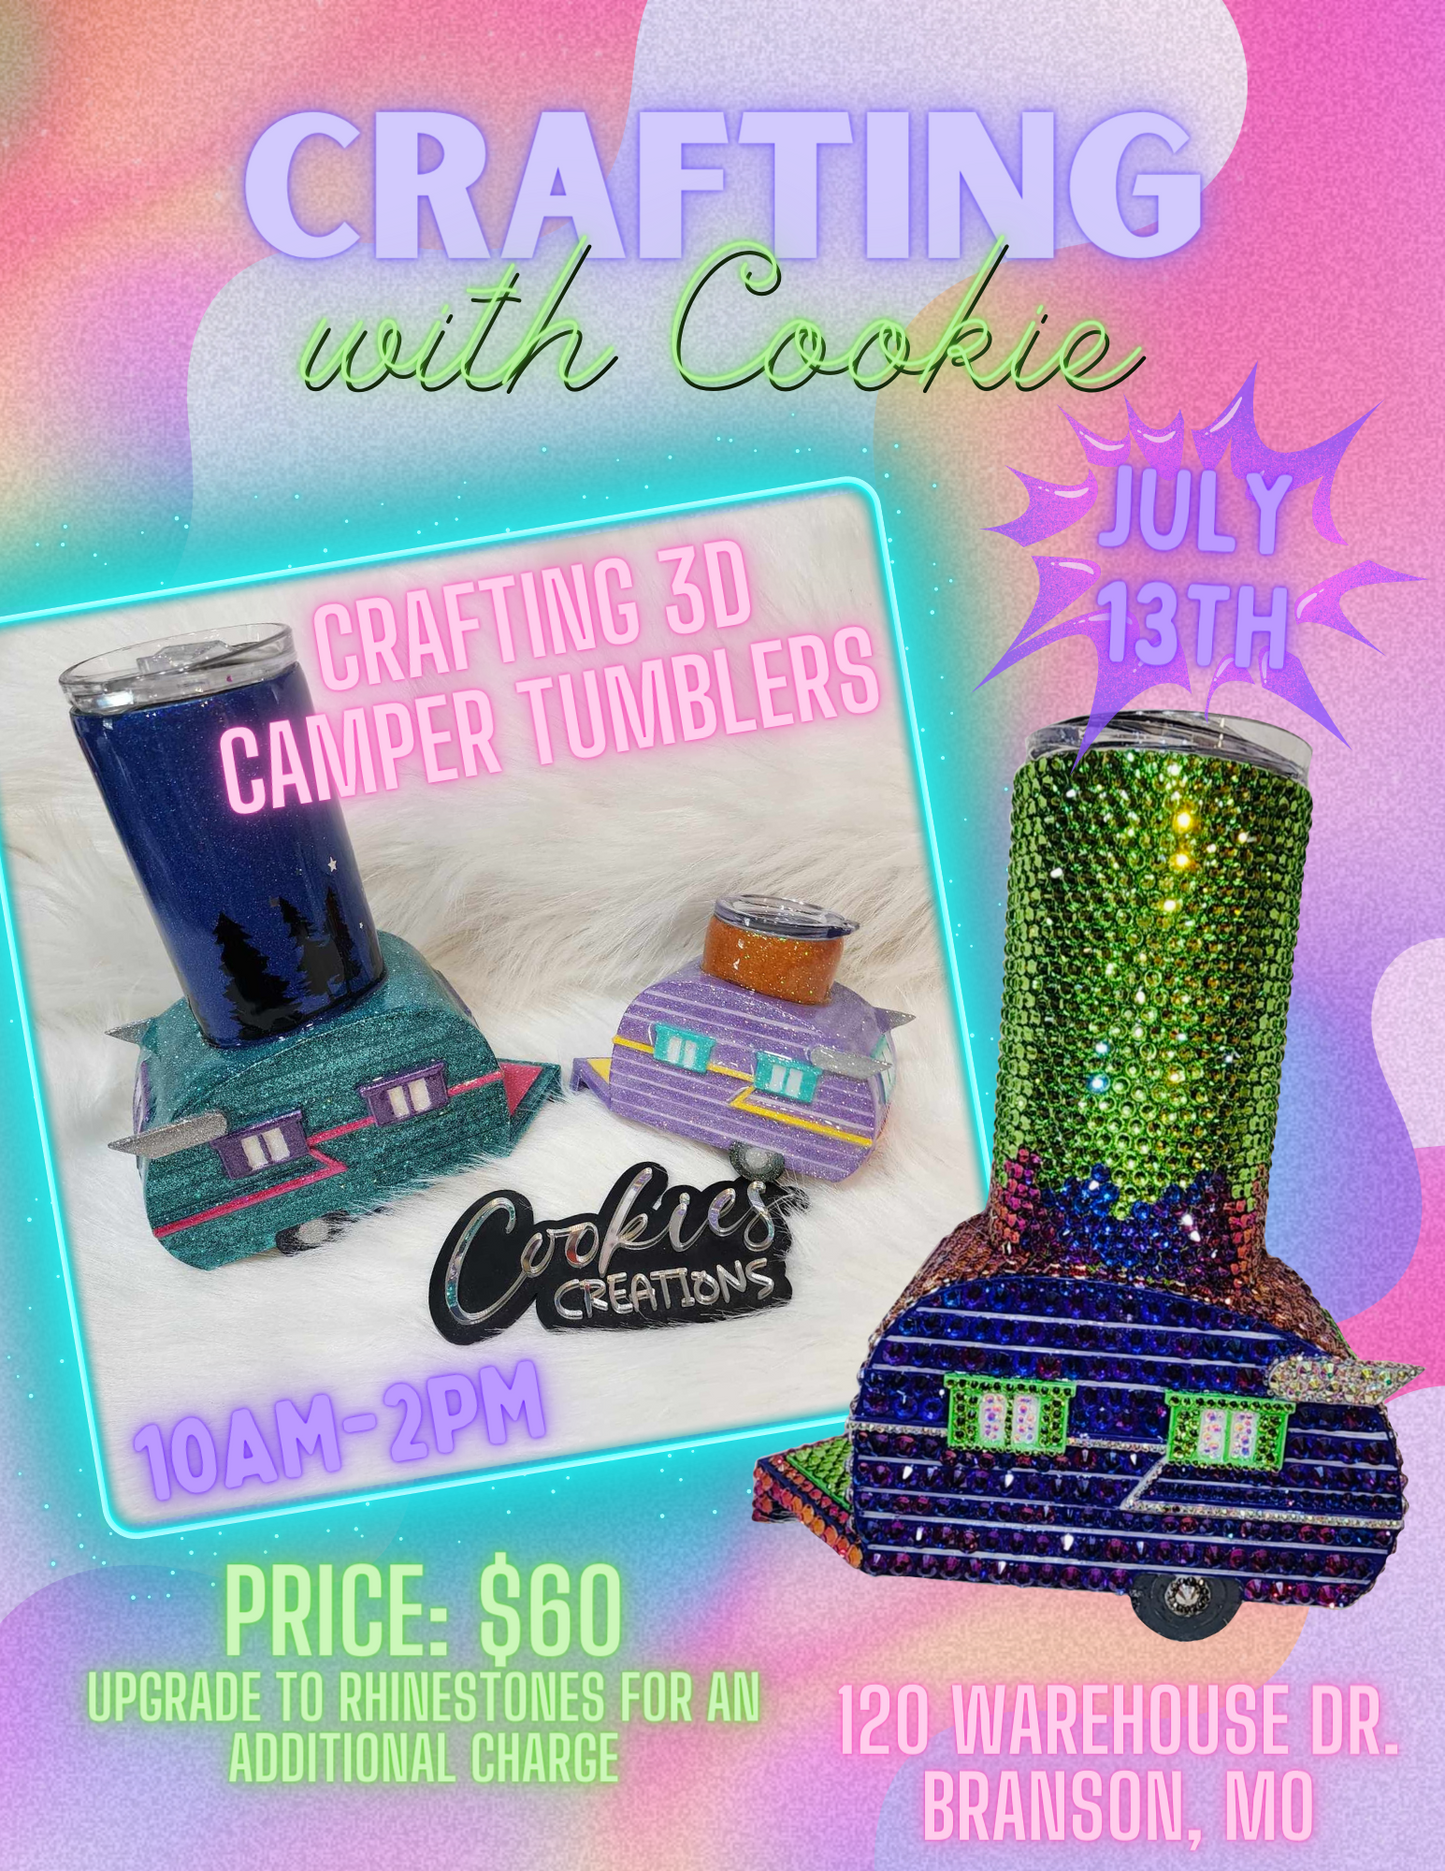 Crafting with Cookie - Sat July 13th, 10am-2pm